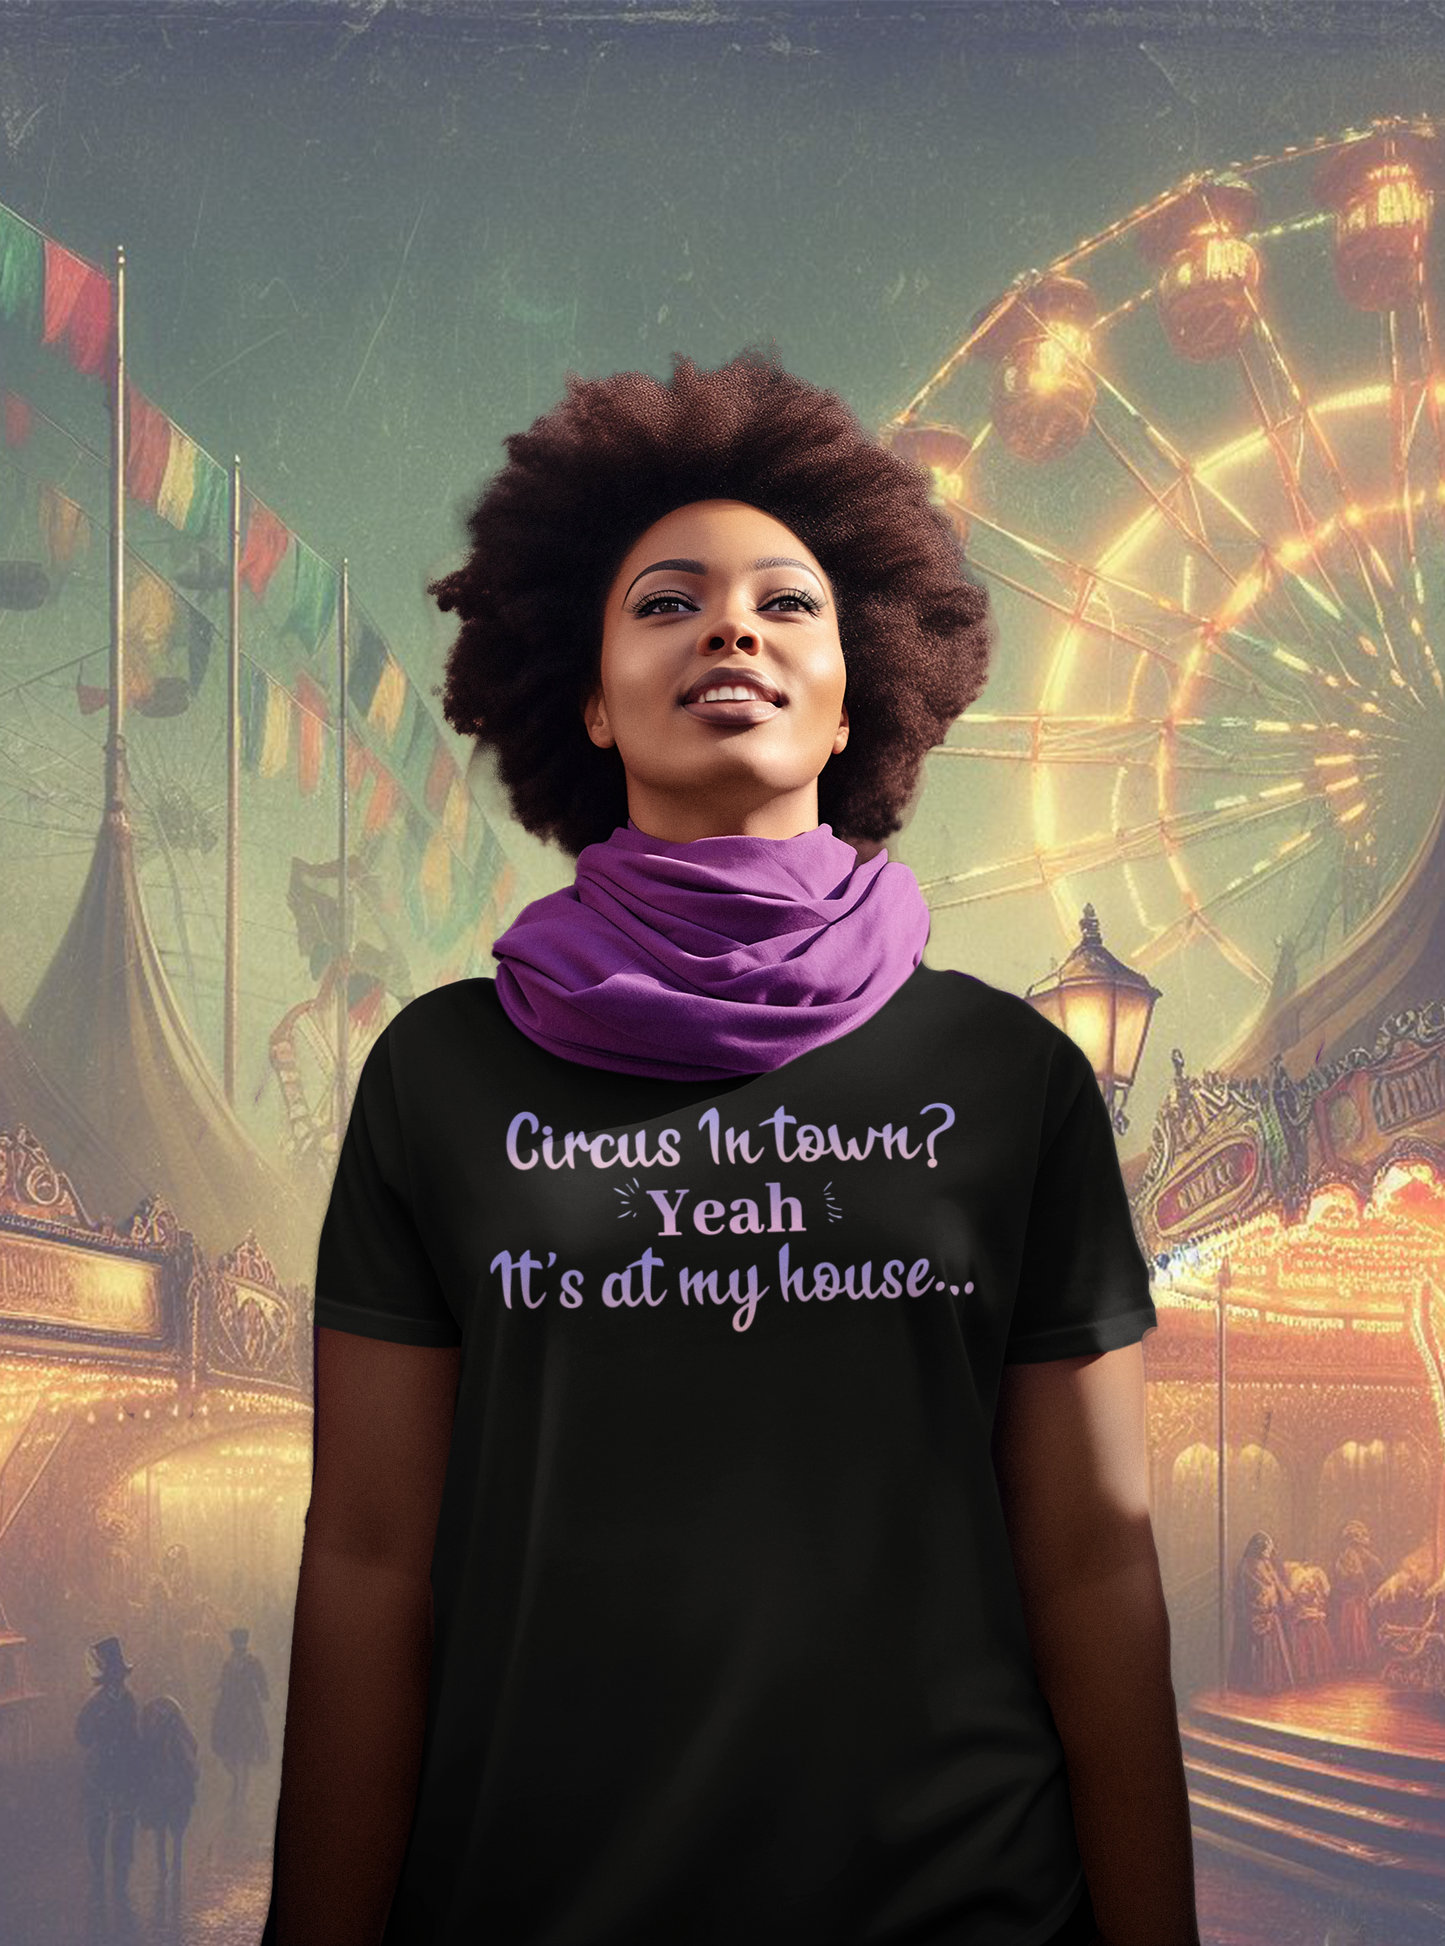 Make Them Laugh With This Terror Circus Exclusive Circus In Town Women's Relaxed T-Shirt